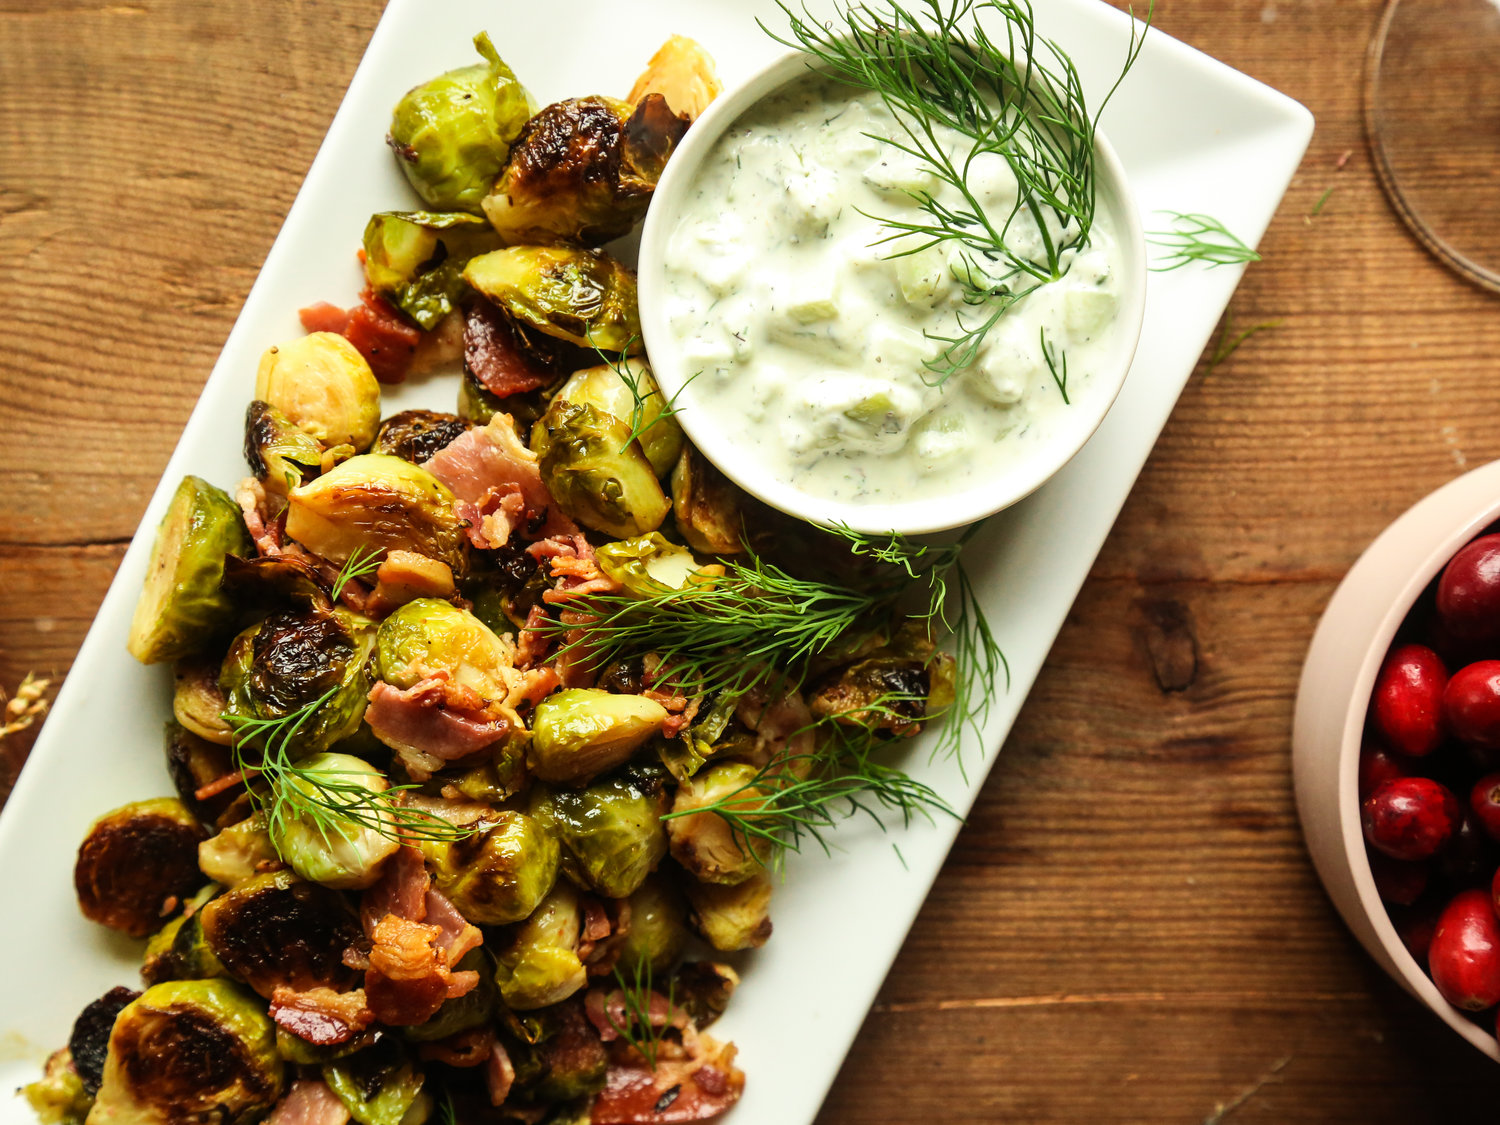 Roasted Brussels Sprouts with Pancetta and Tzatziki on a wood table next to a bowl of fresh cranberries